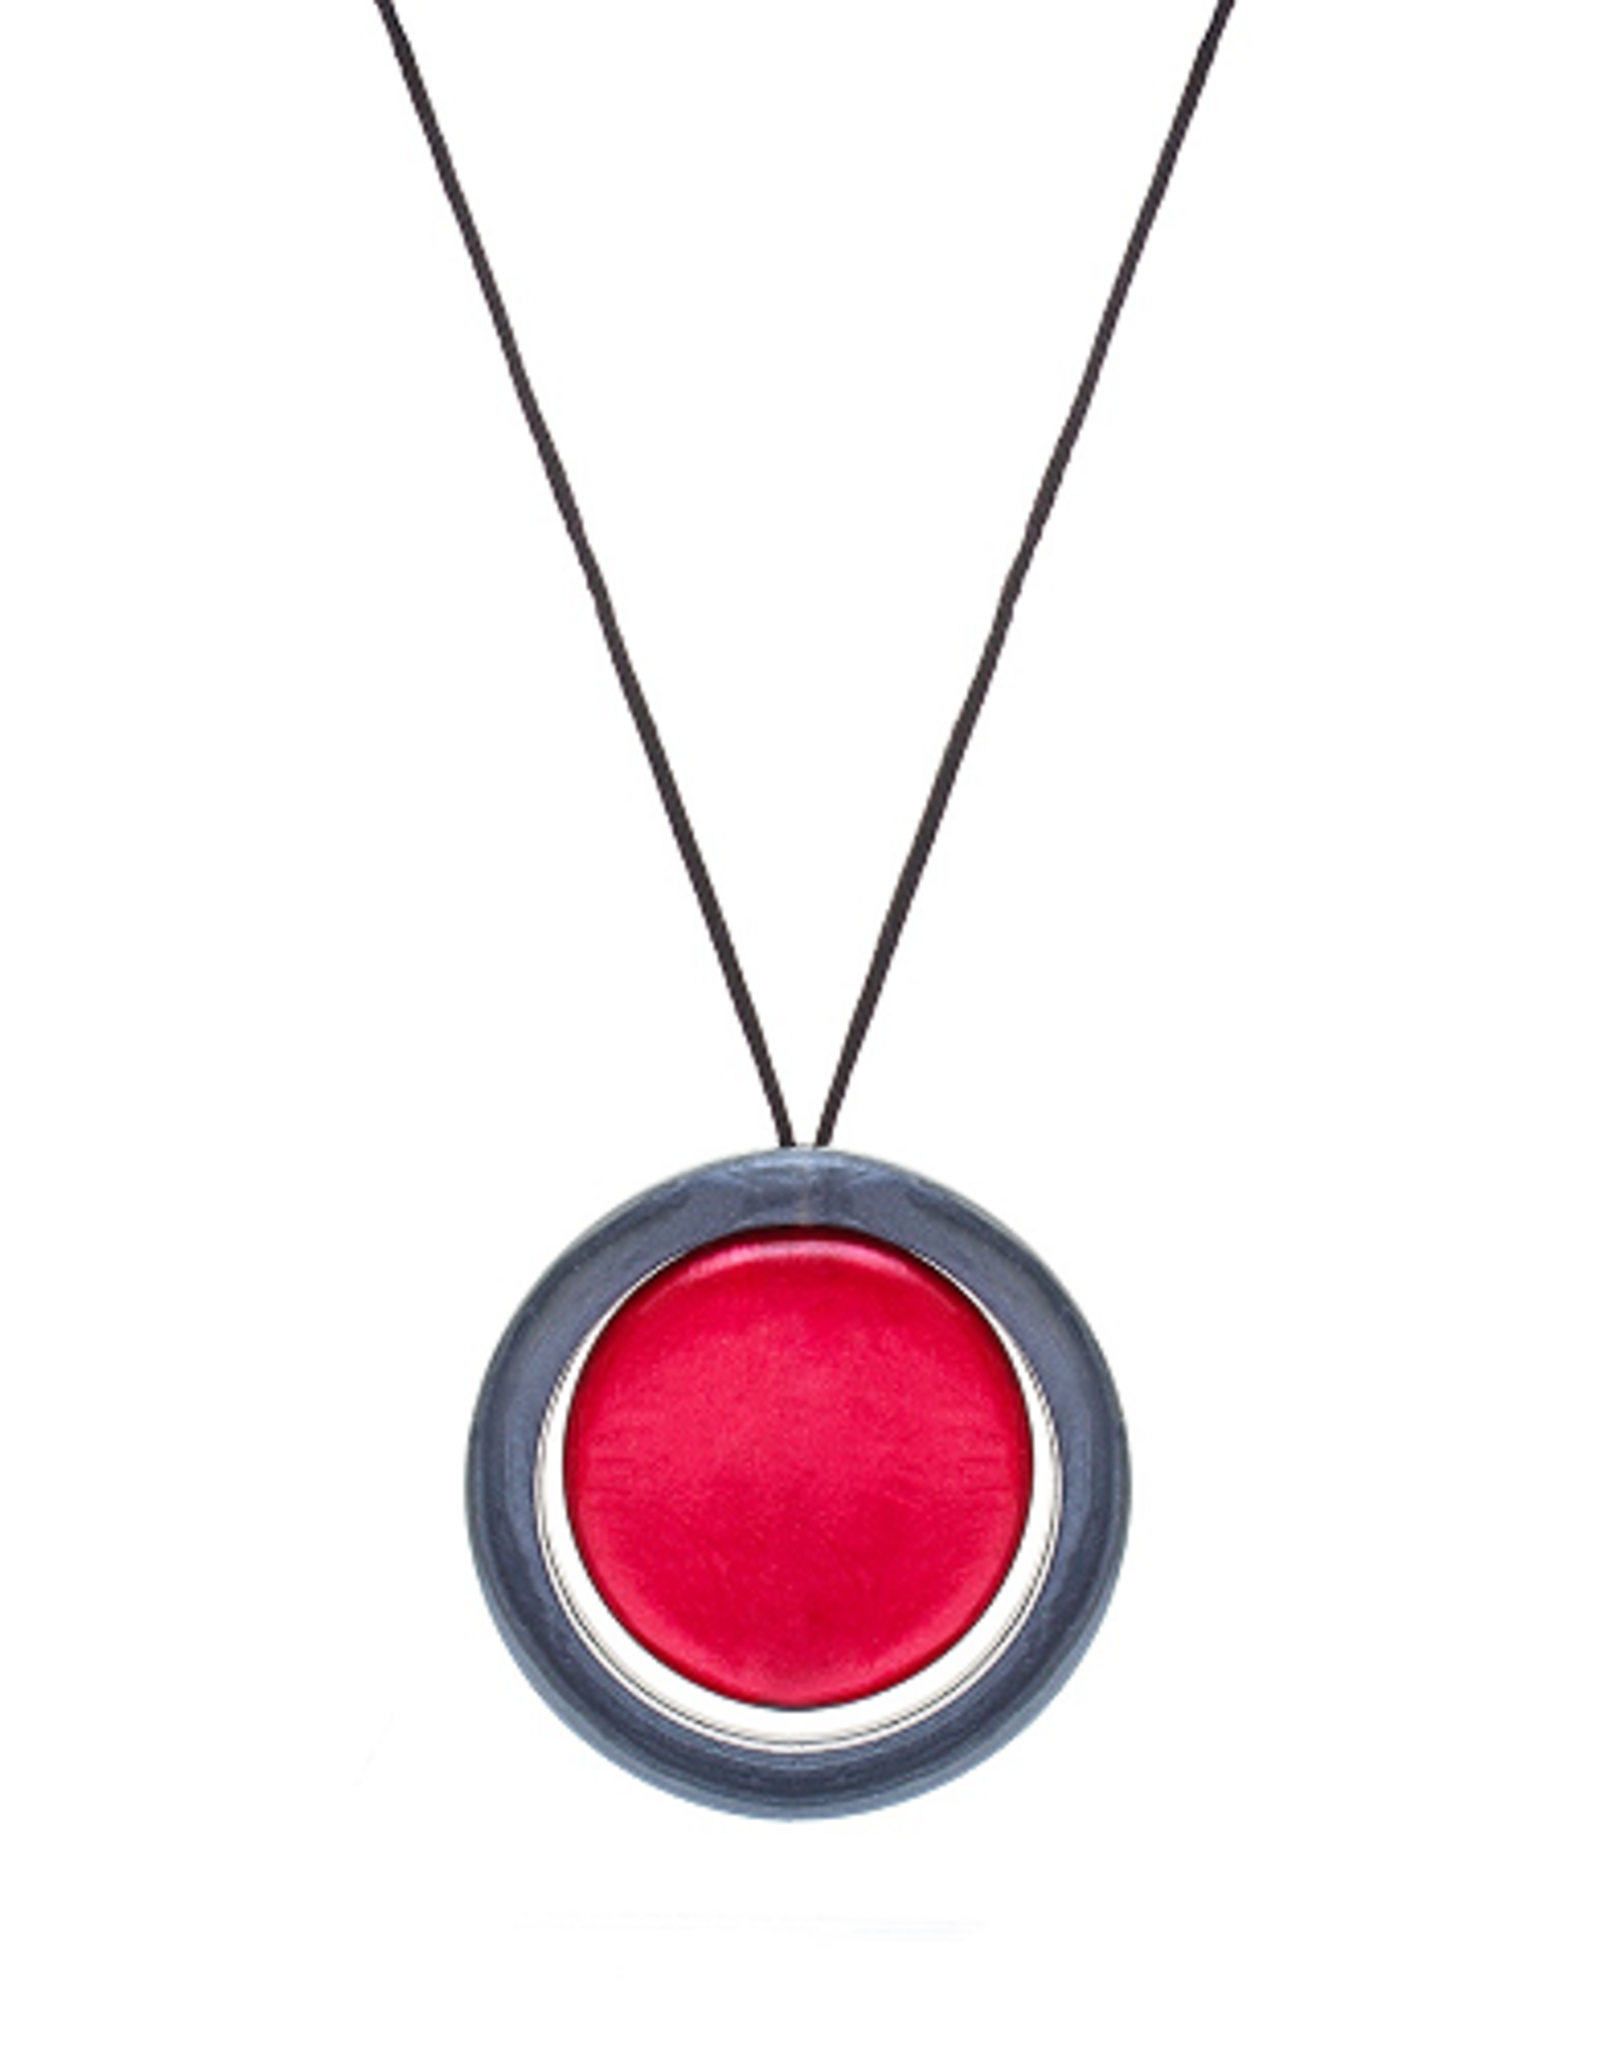 Chewigem - The Spinner - Red